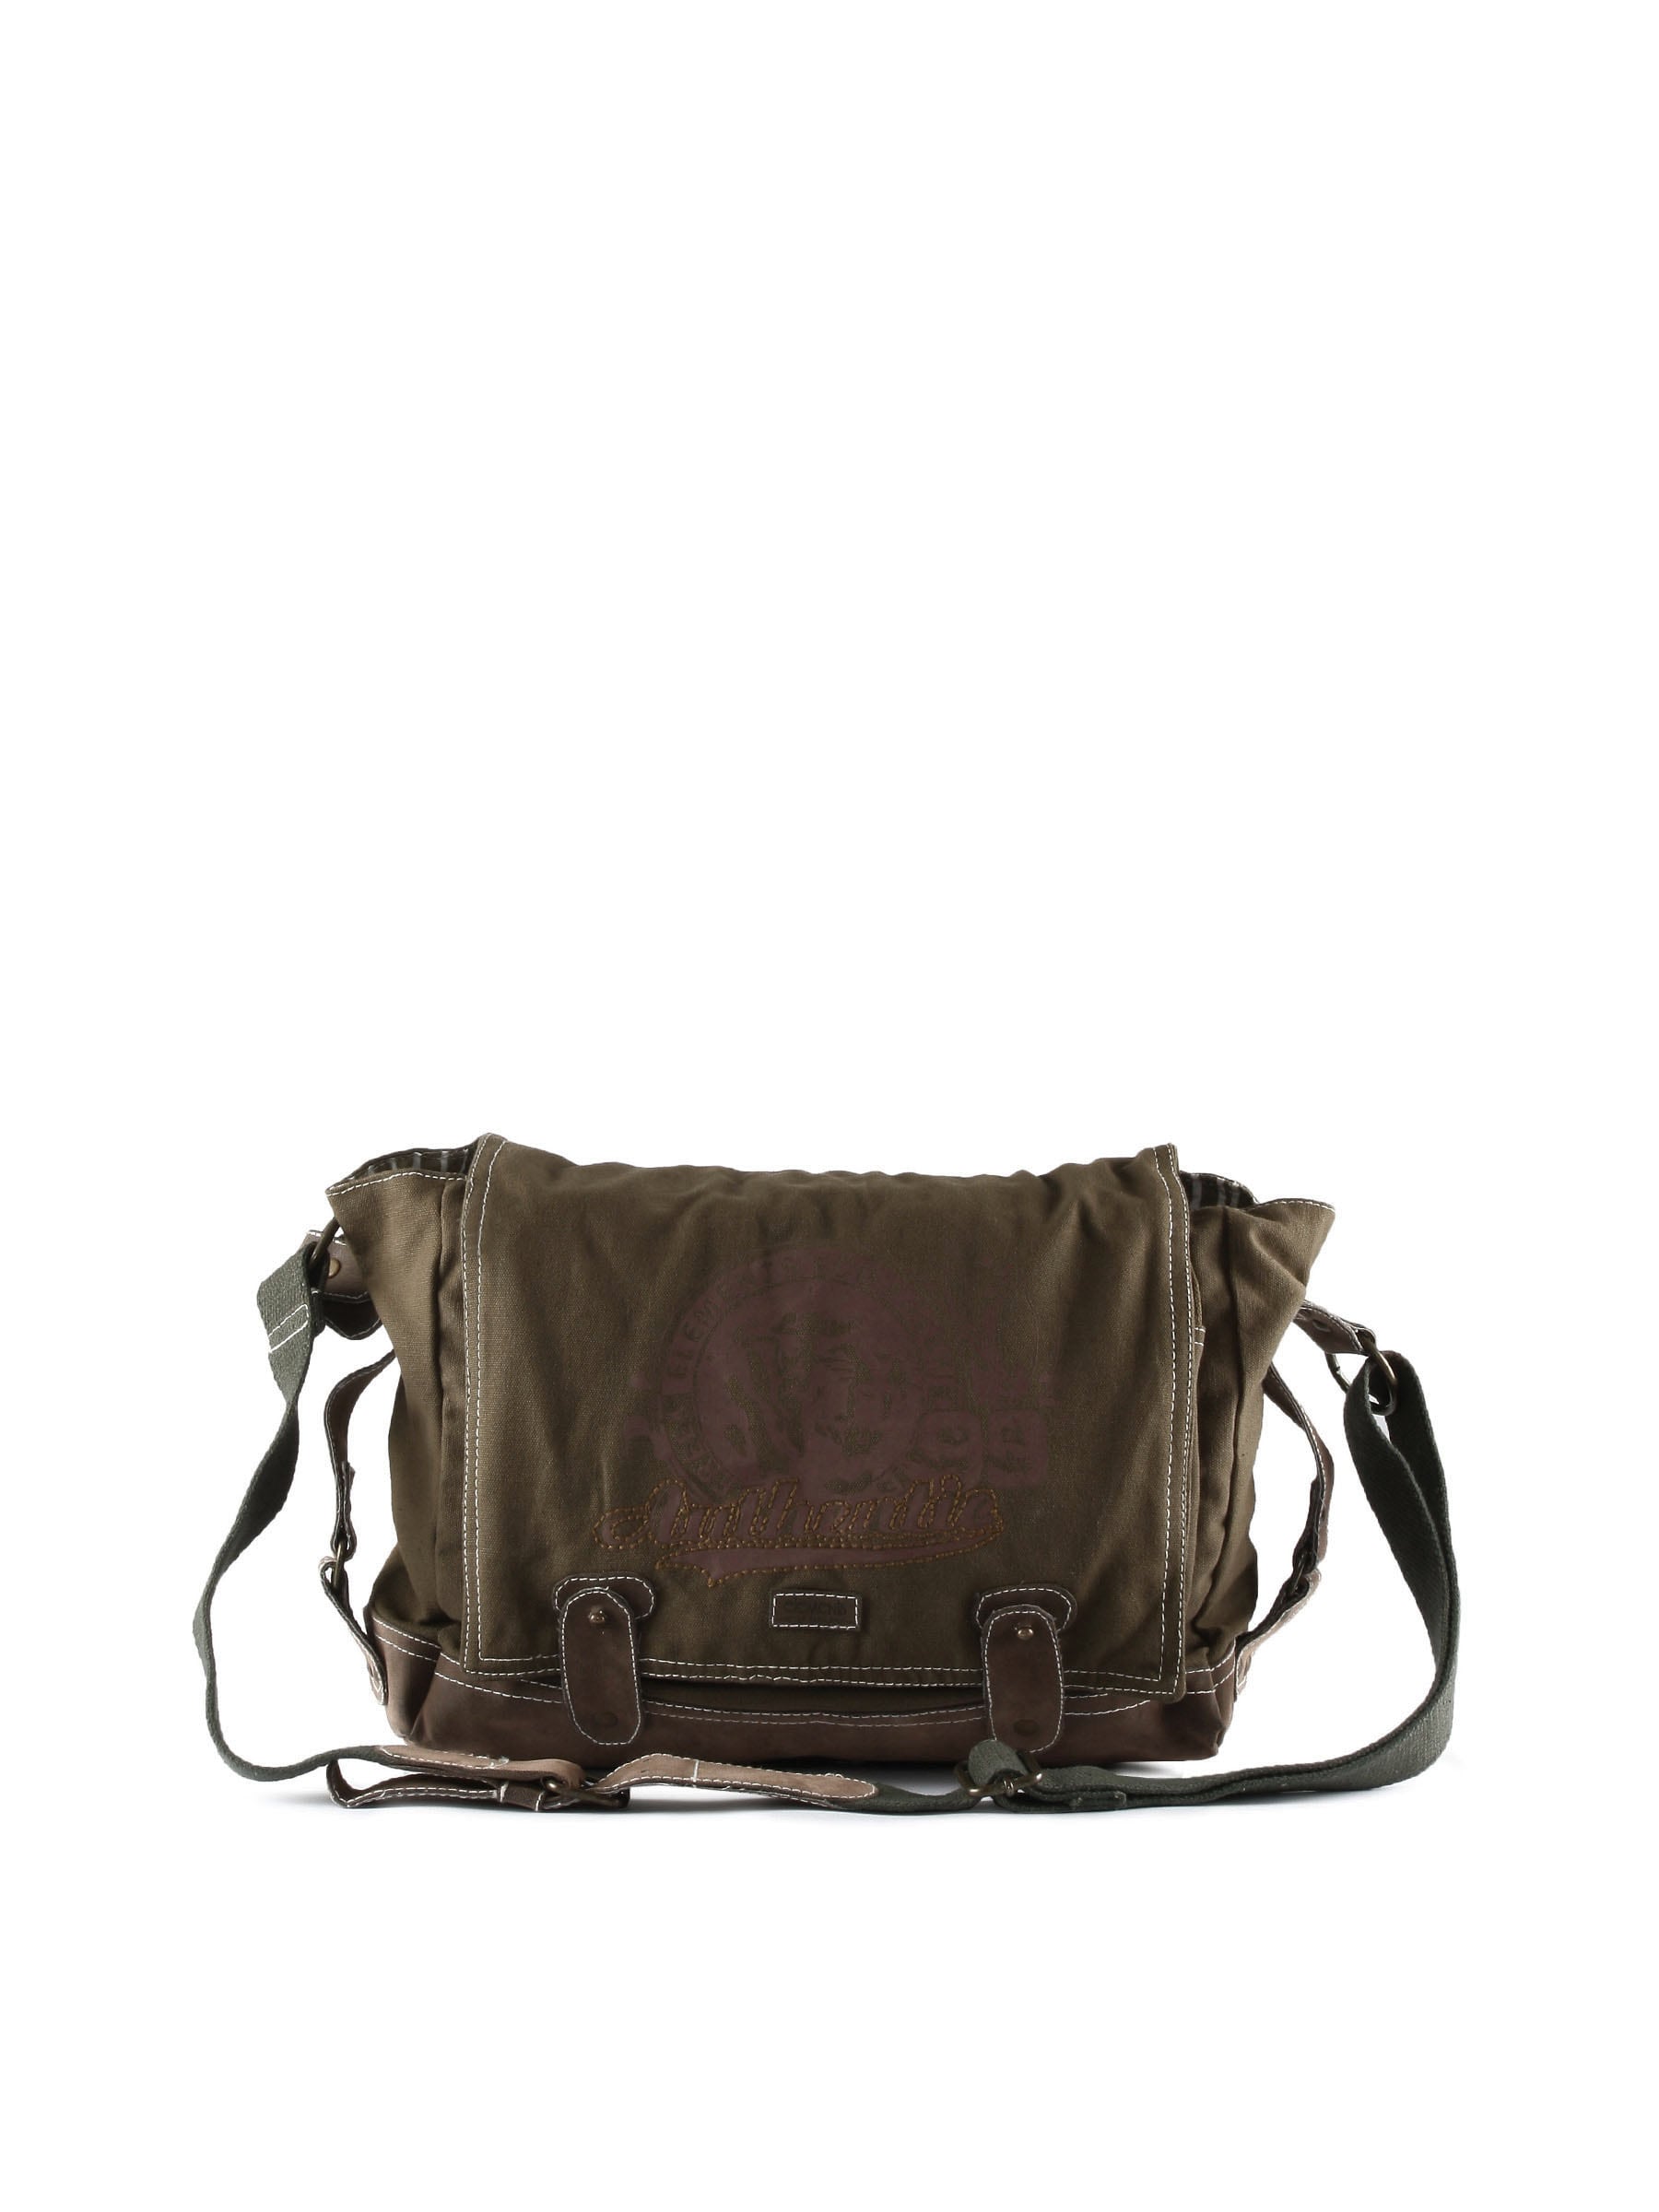 Peter England Unisex Casual Olive Bag